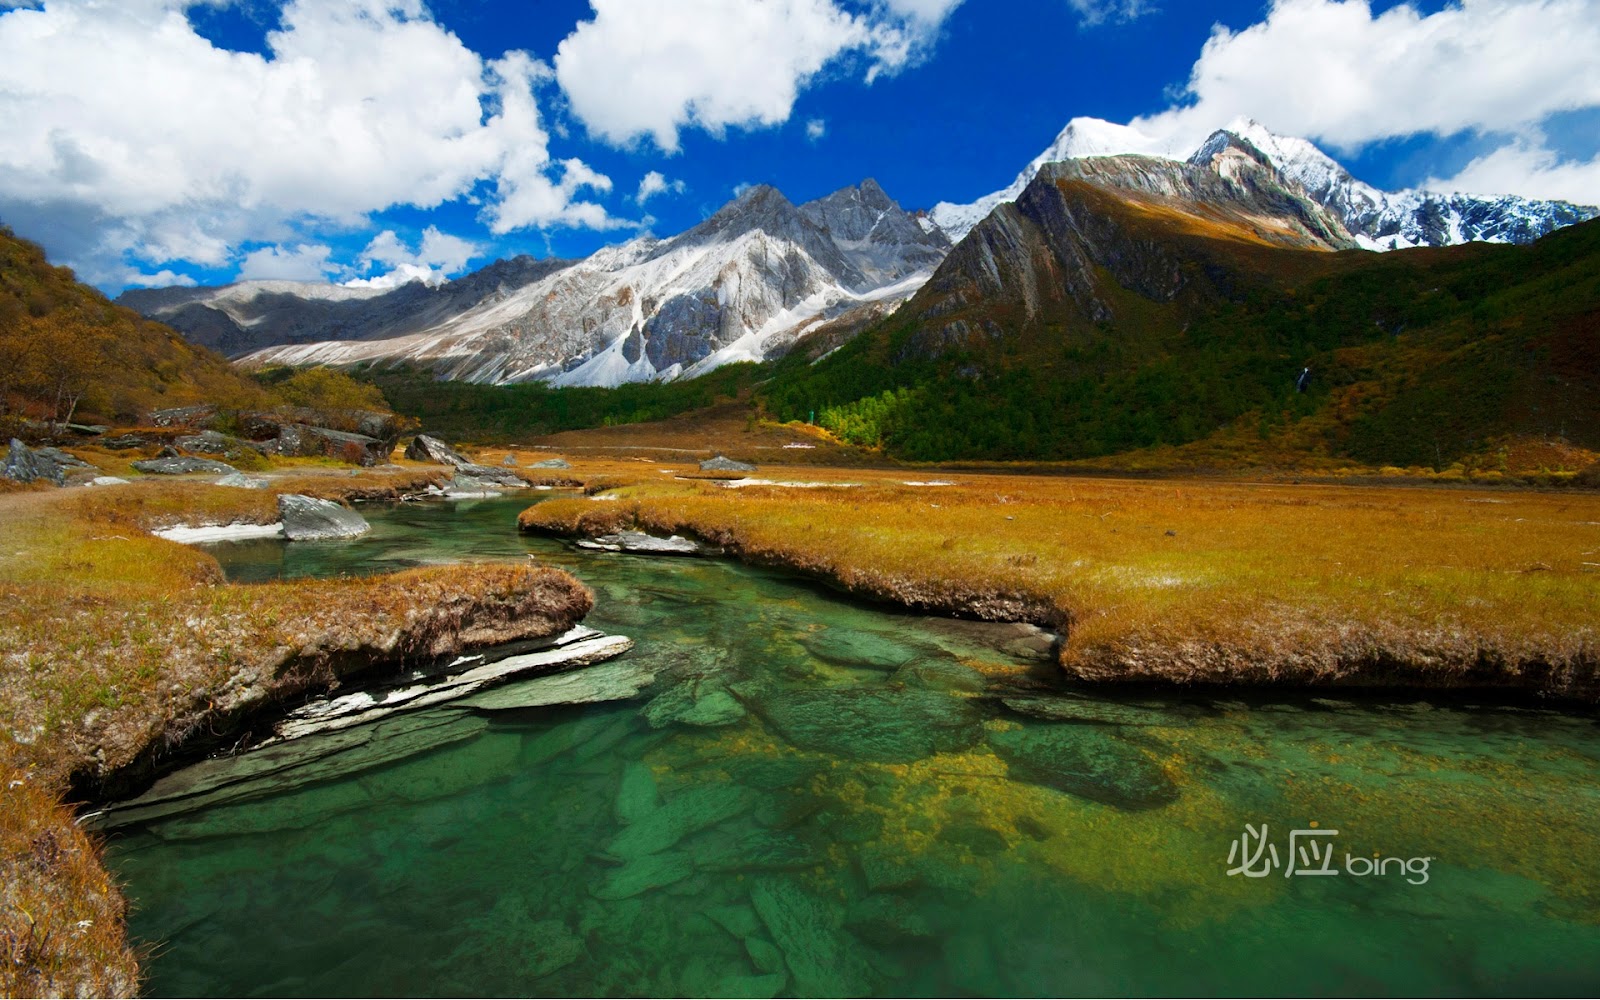  HD Nature Background Wallpapers For Laptop Scenery Southwest China 1600x1000